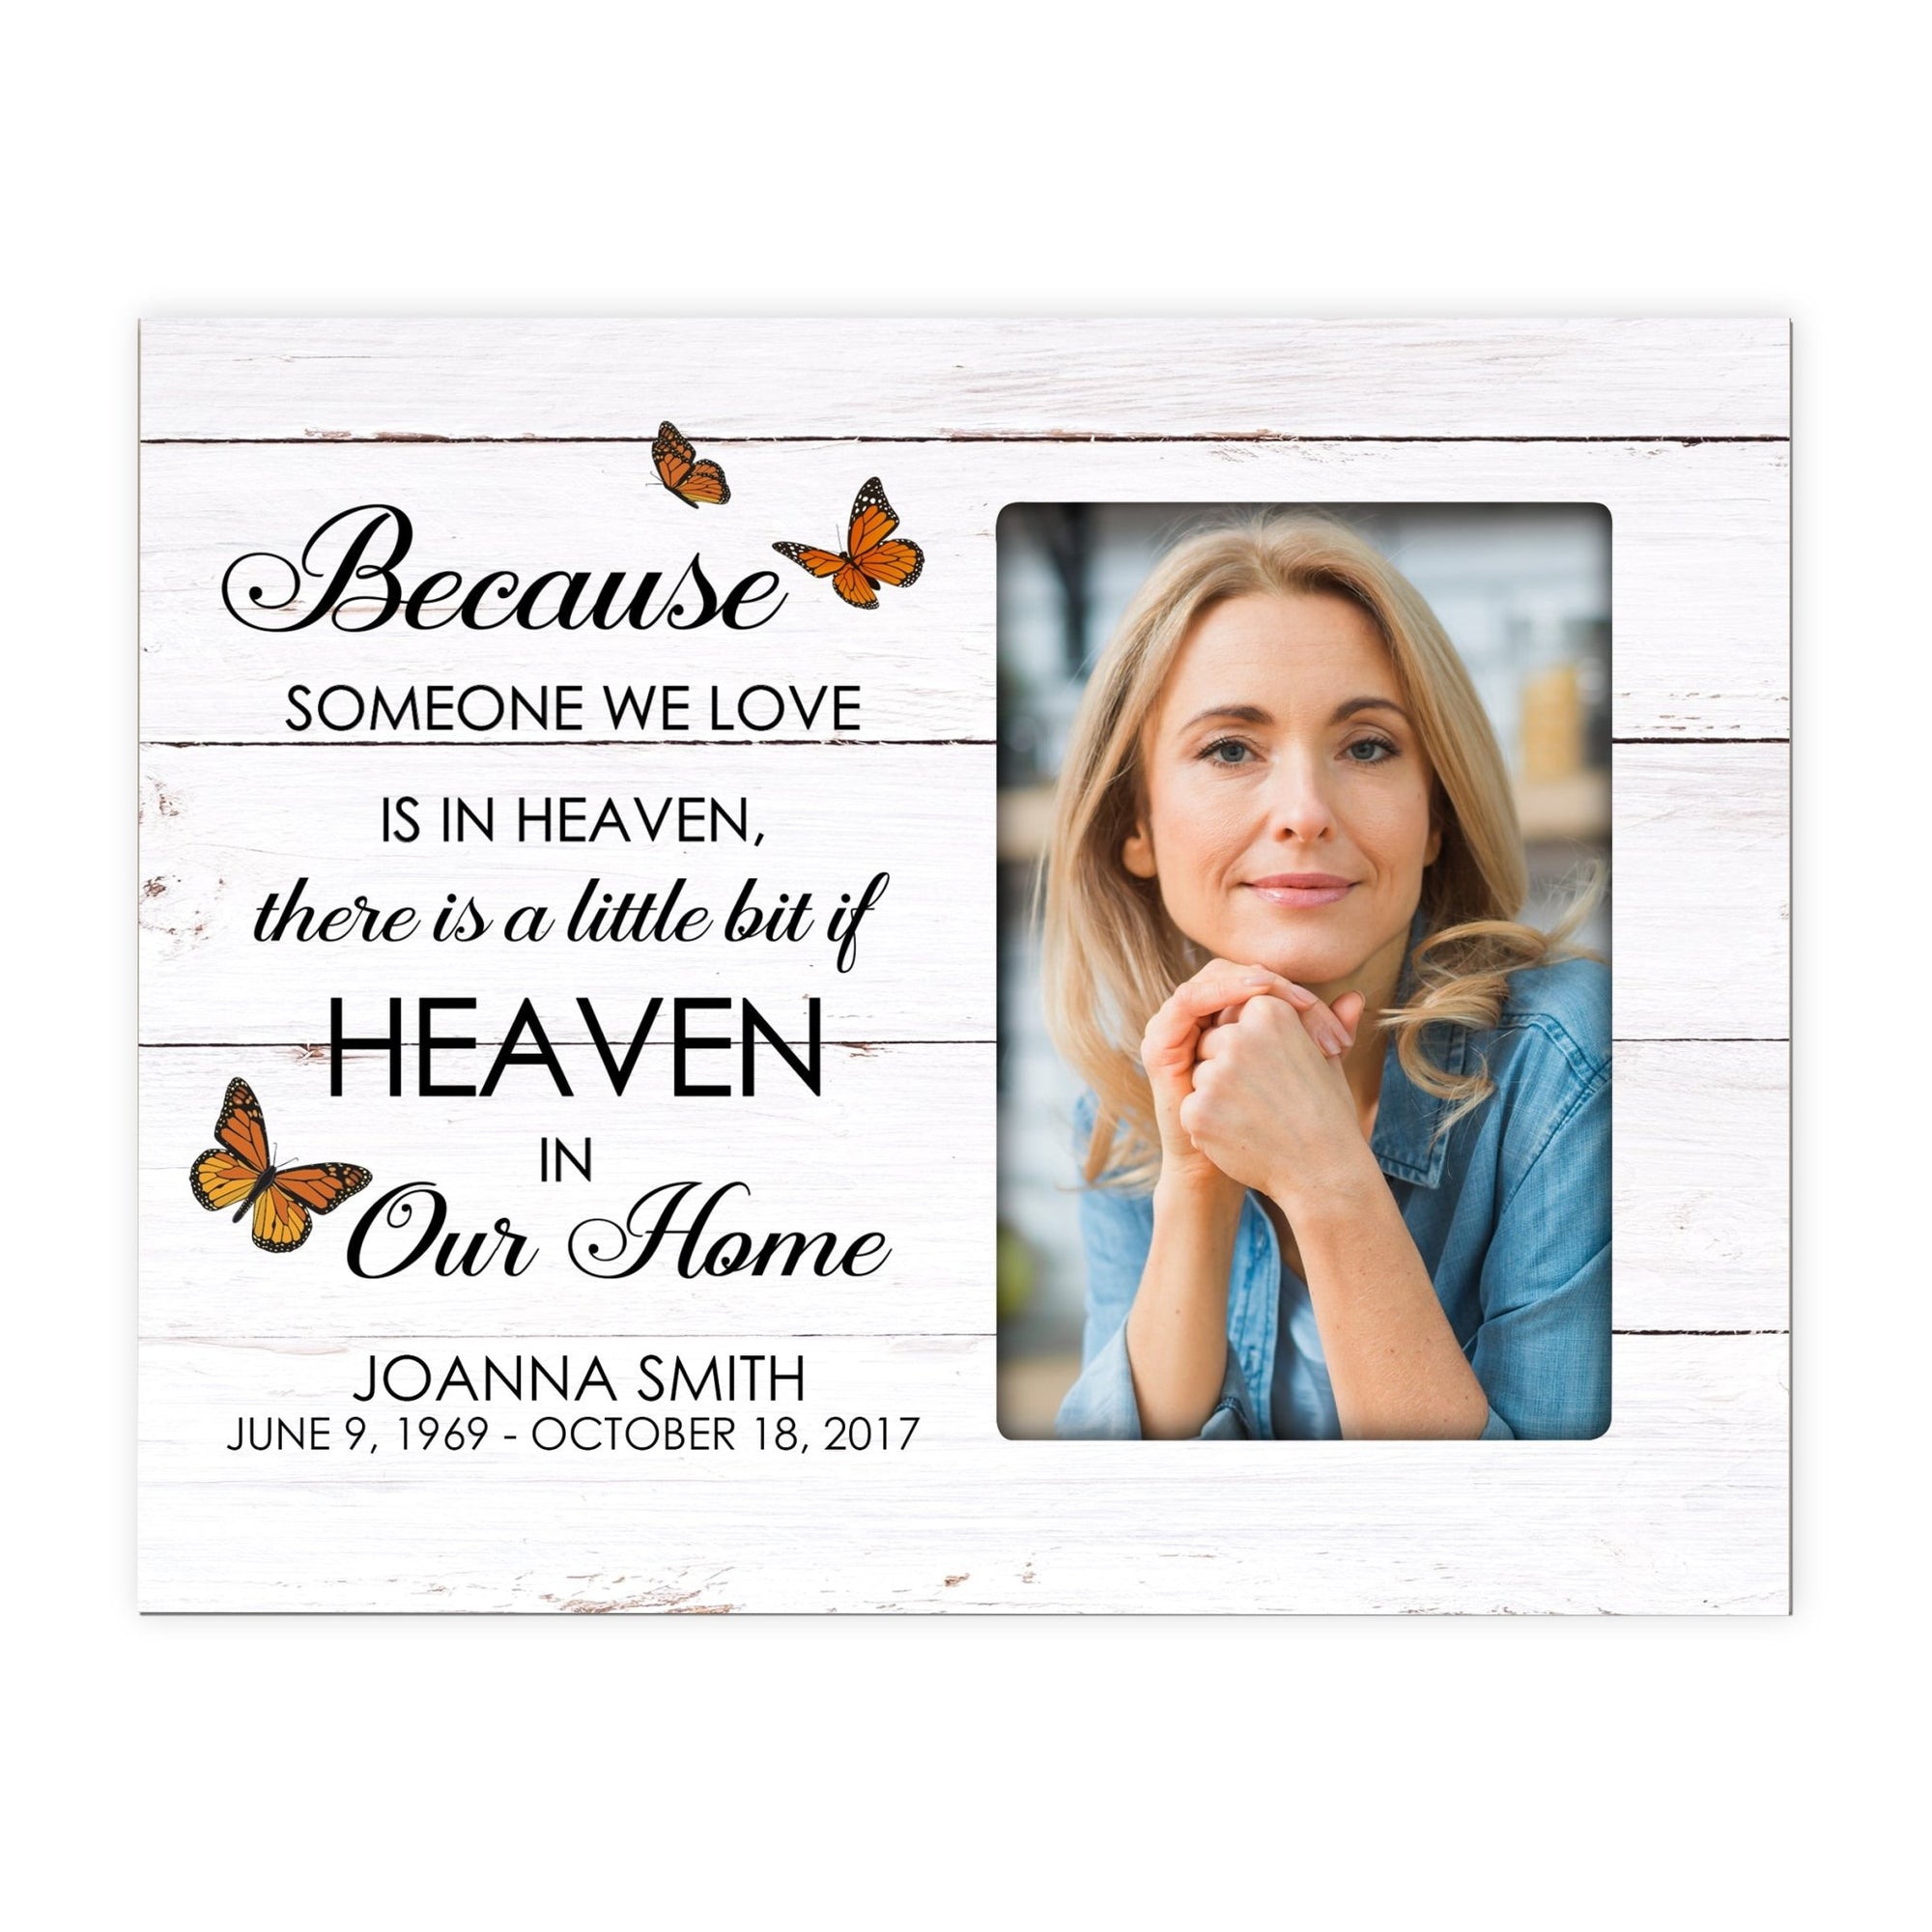 Personalized Horizontal 8x10 Wooden Memorial Picture Frame Holds 4x6 Photo - Because Someone We Love (White Distressed) - LifeSong Milestones